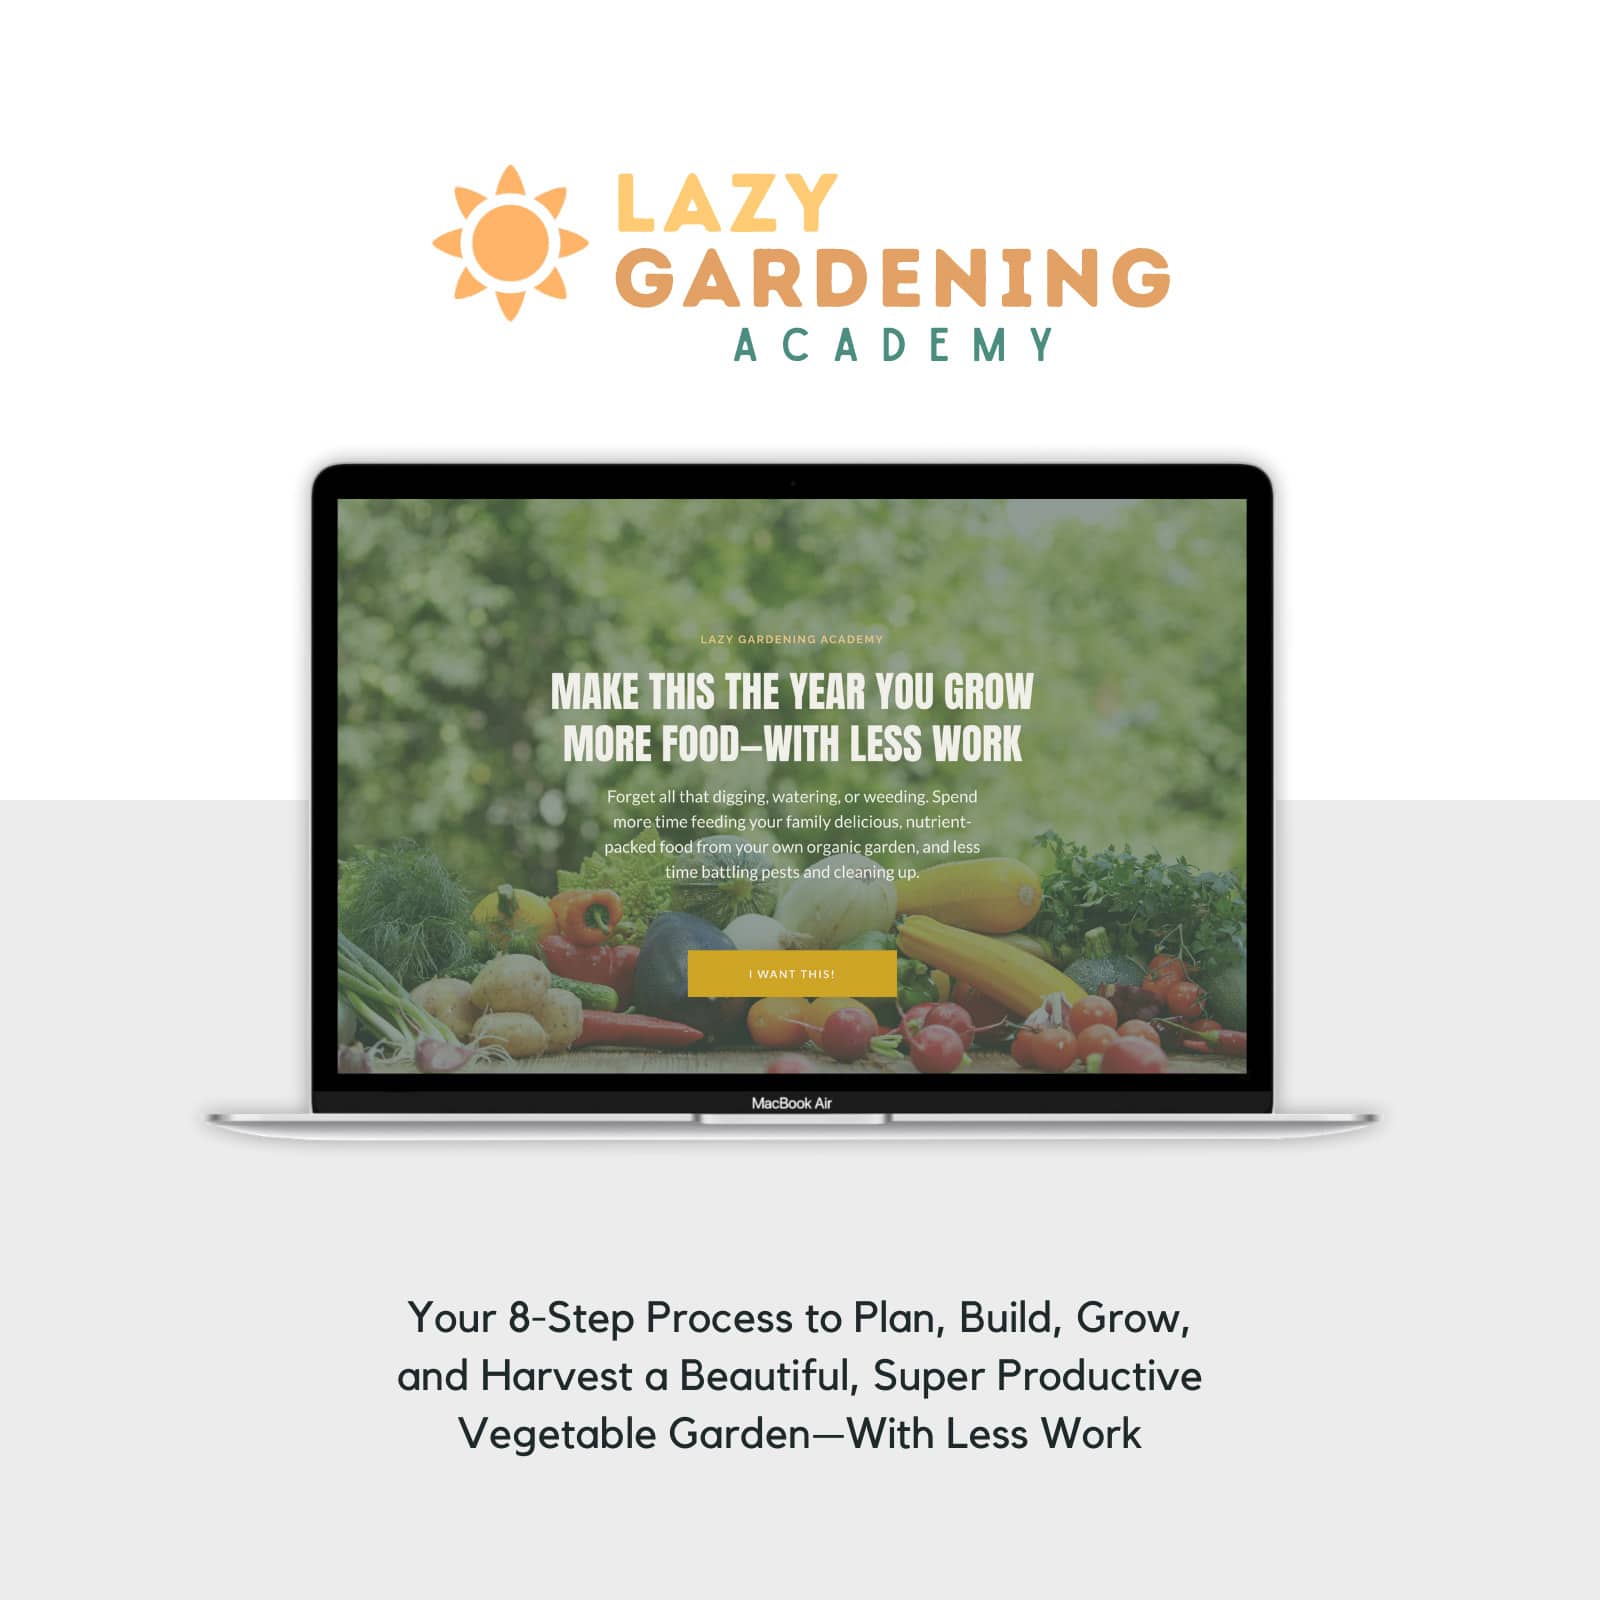 Laptop mockup promoting Lazy Gardening Academy online course